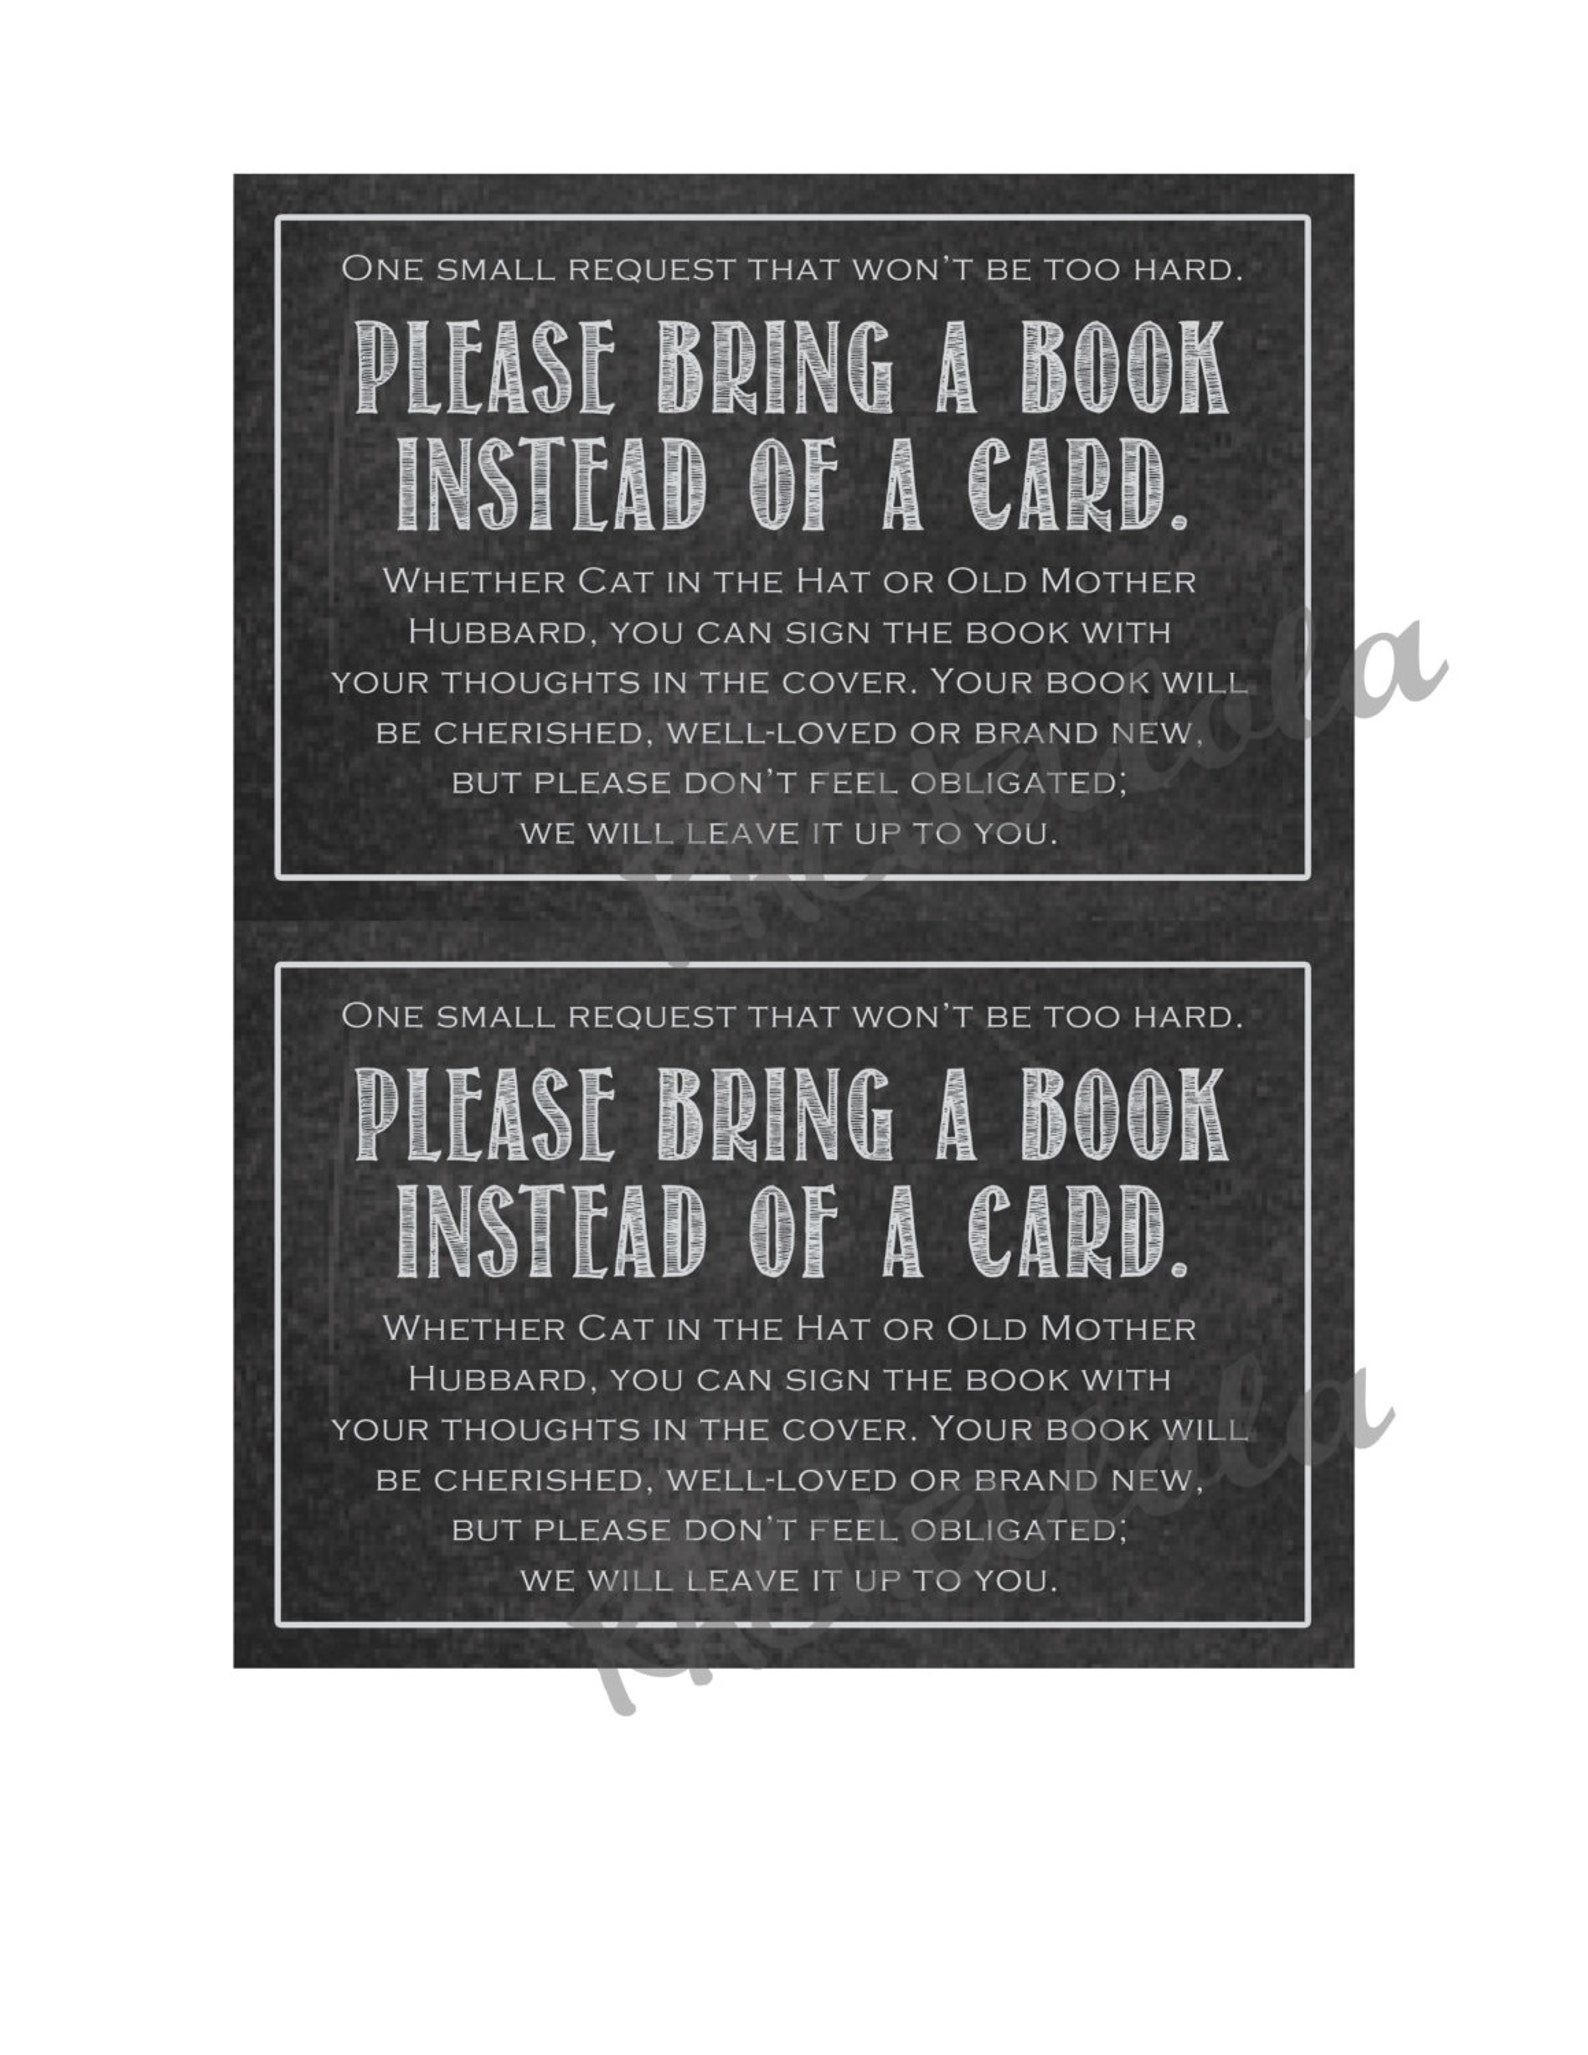 chalk-printable-bring-a-book-instead-of-a-card-baby-shower-etsy